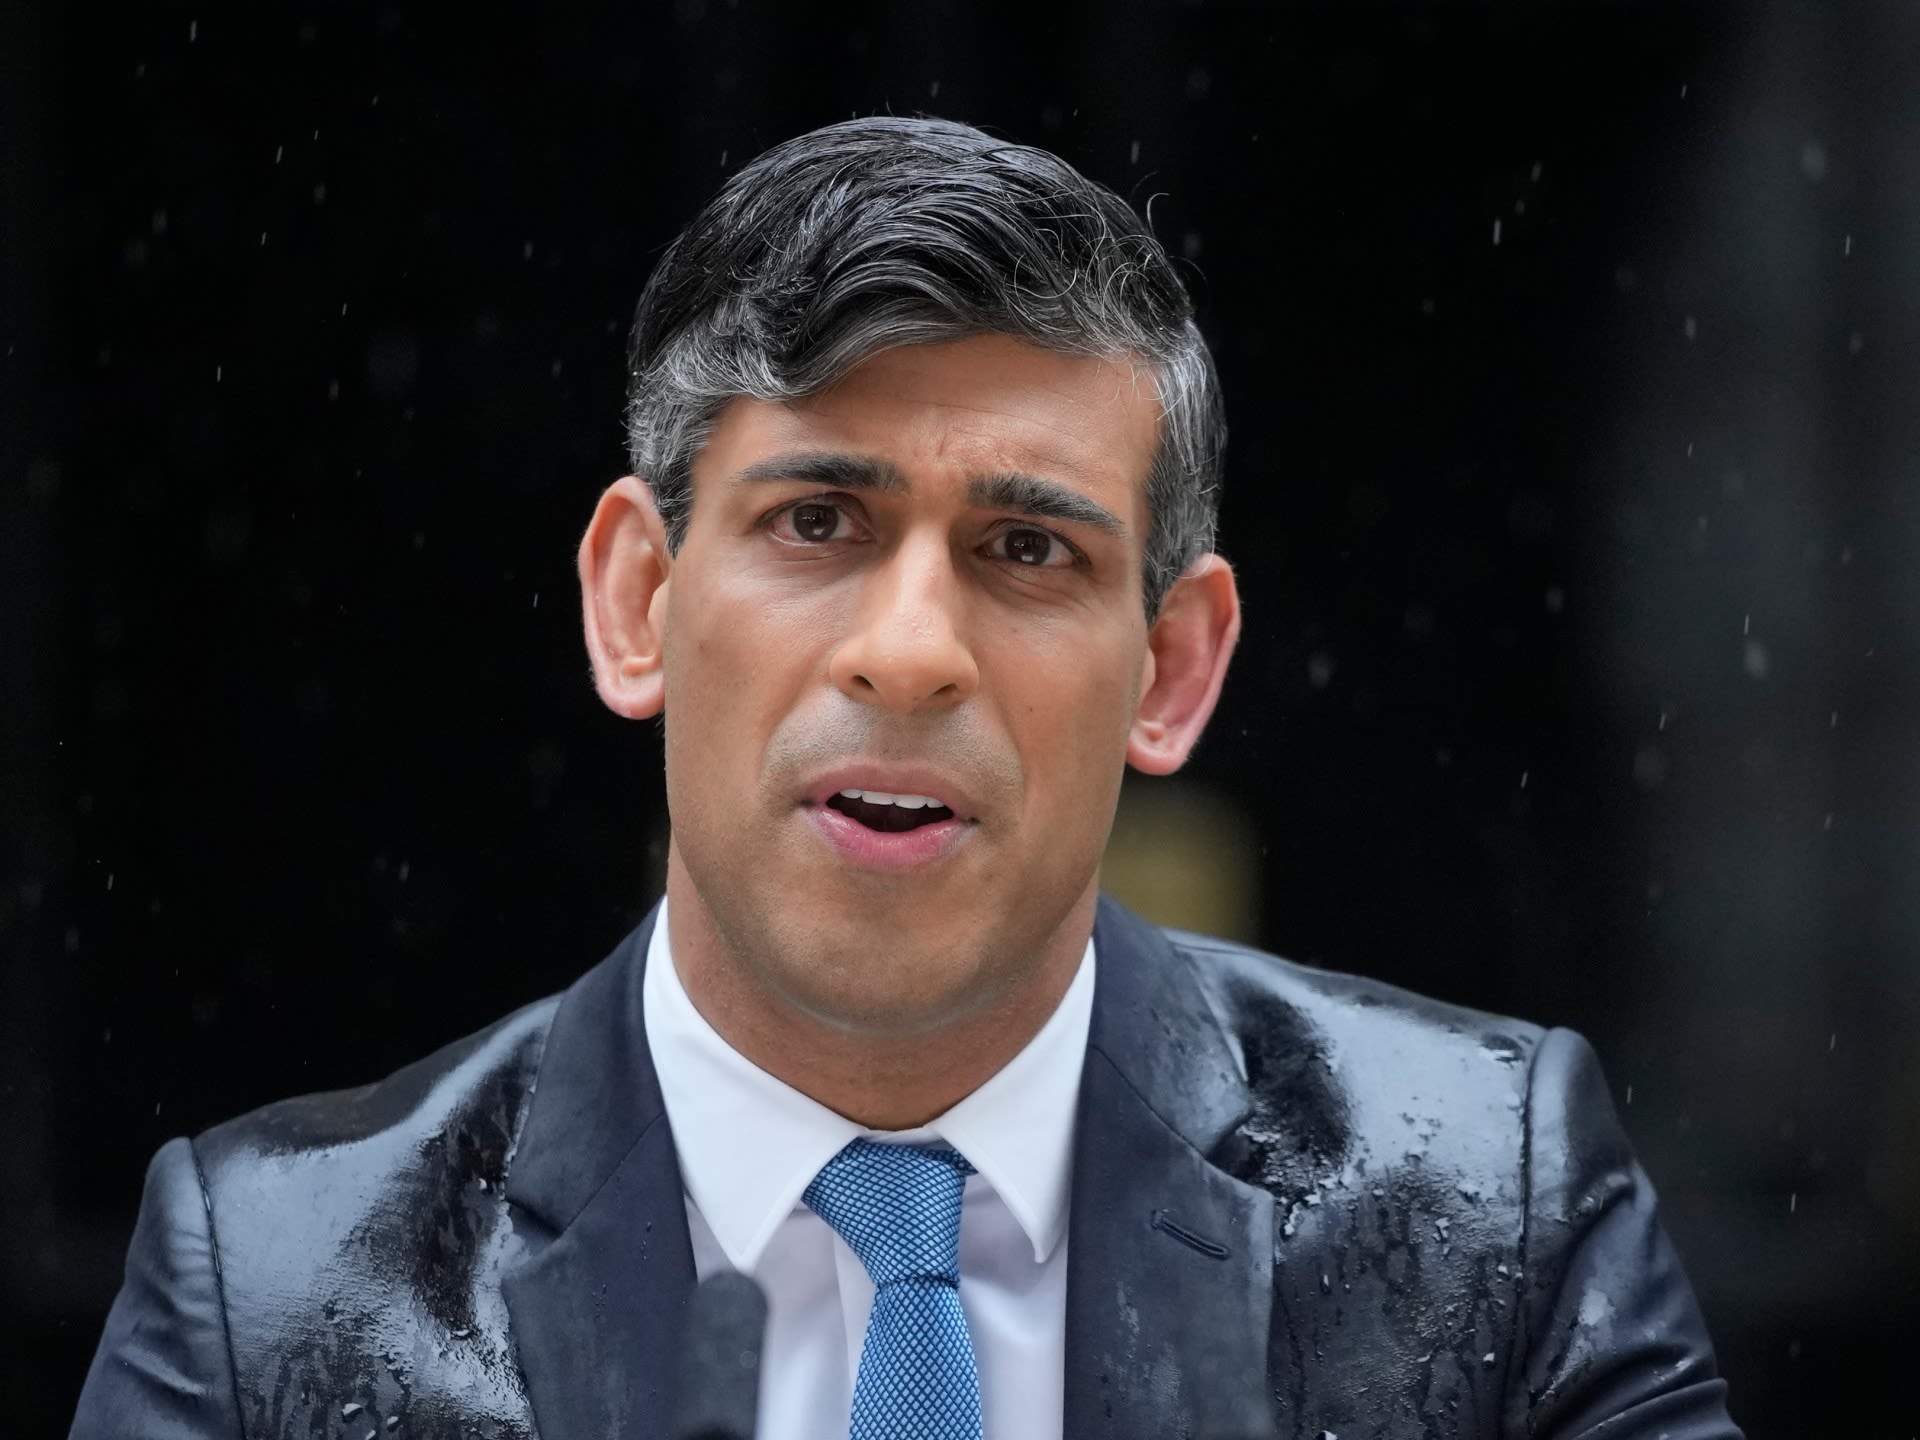 Rishi Sunak names July 4 for UK general election: What’s next?